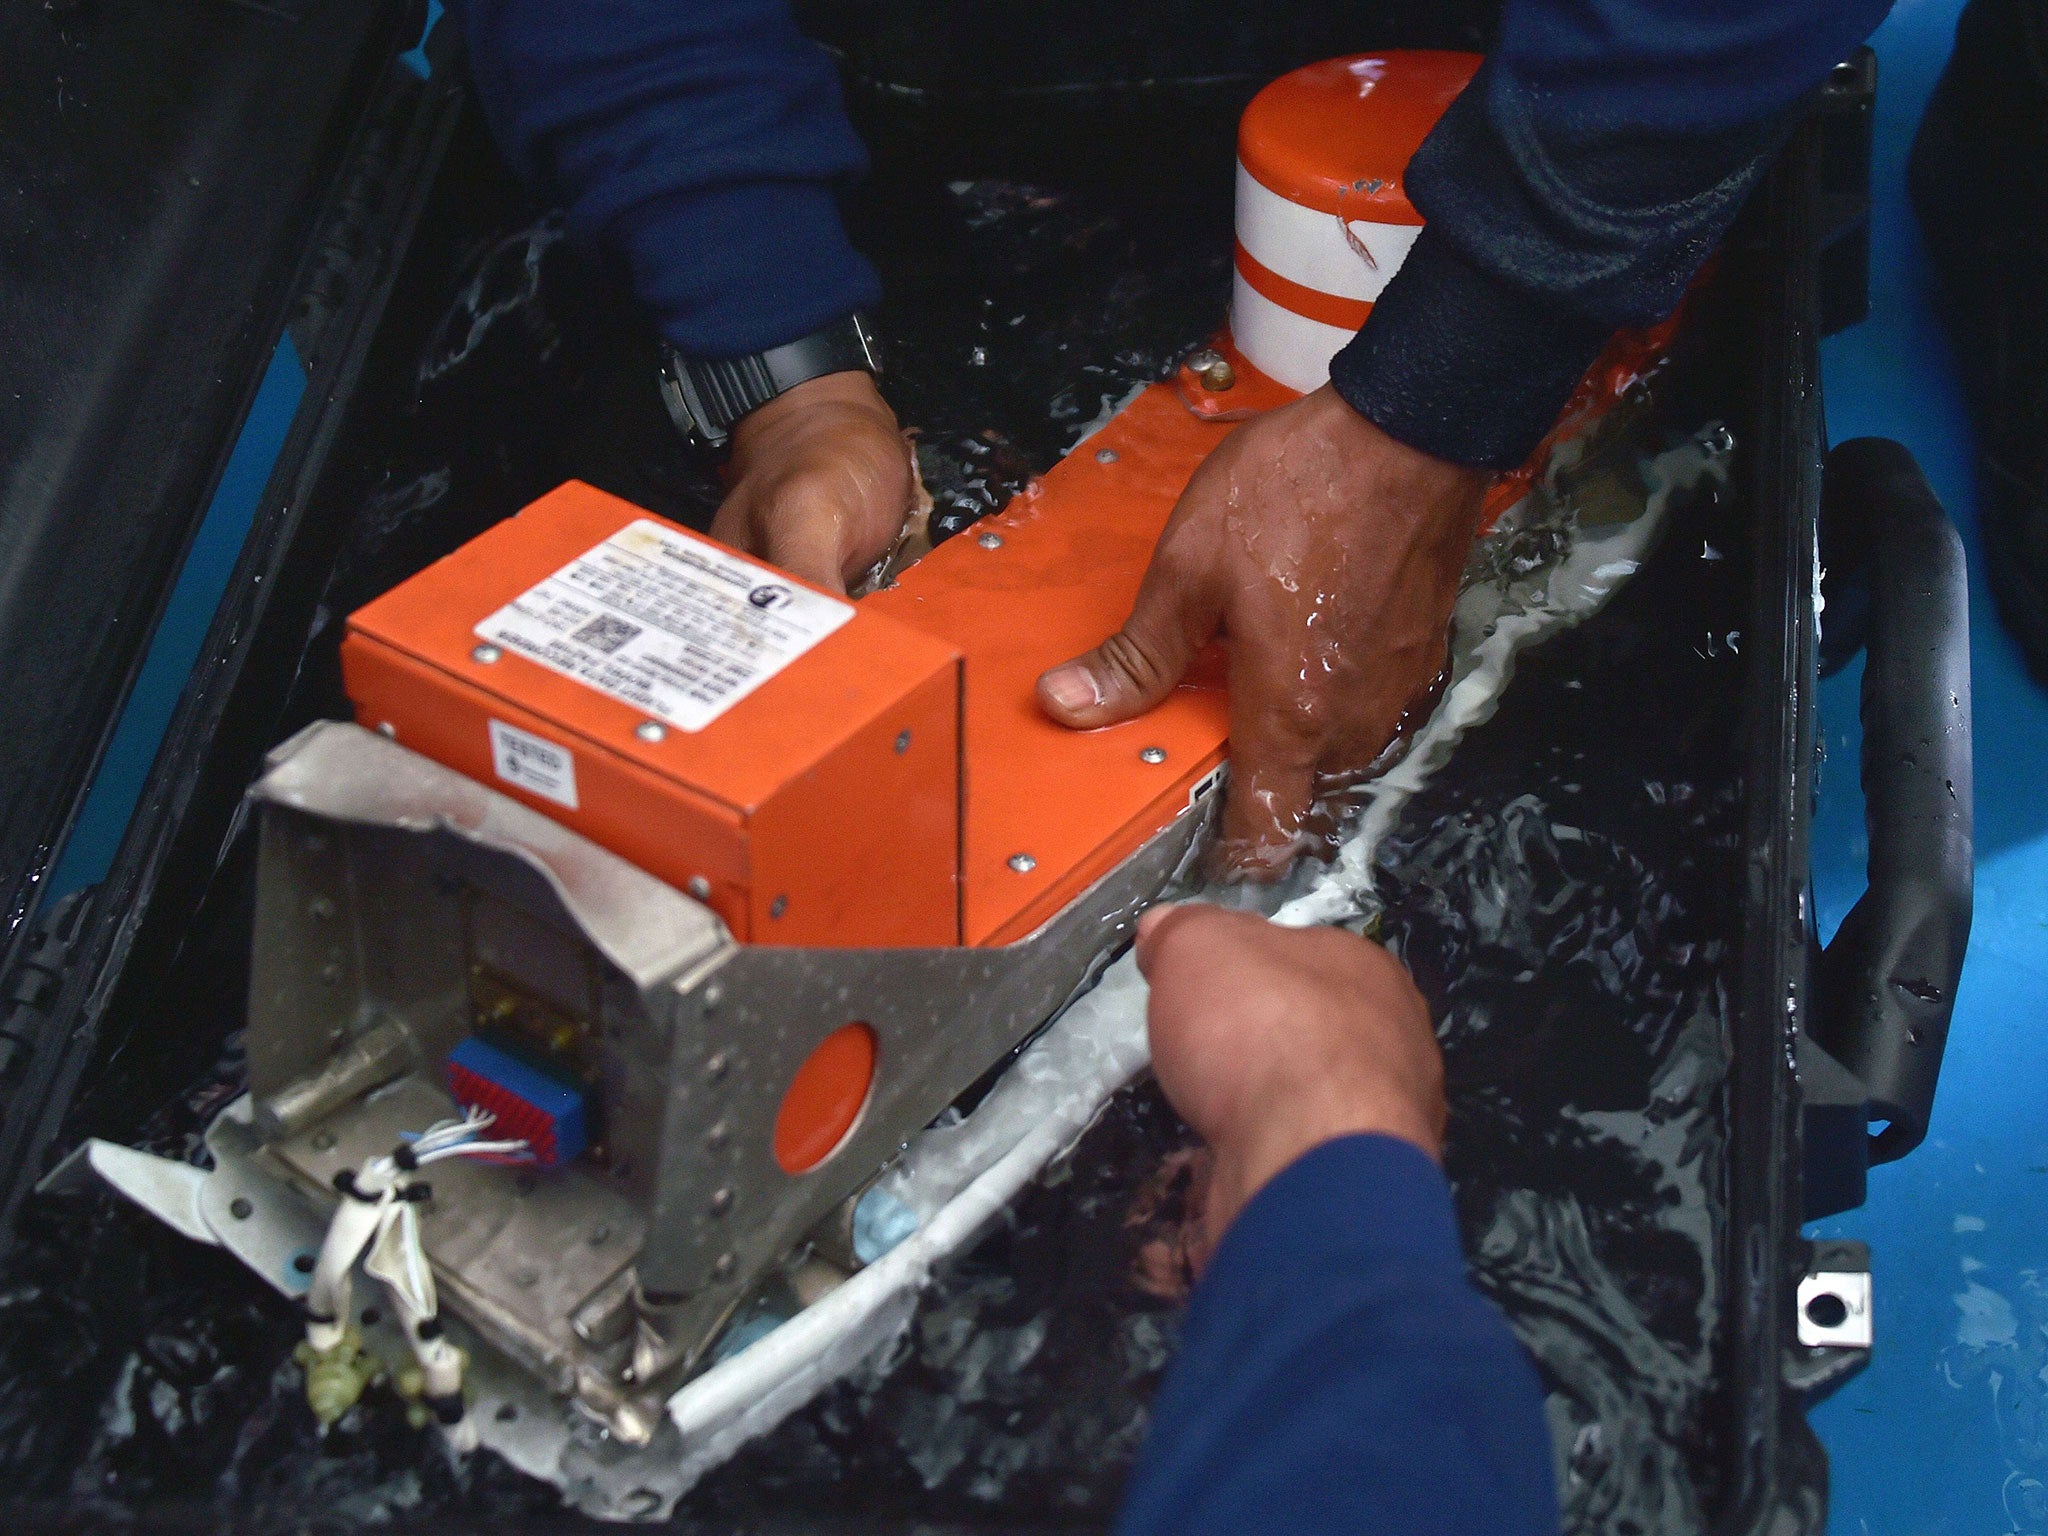 Indonesian divers handle the FDR (Flight Data Recorder) of the AirAsia flight QZ8501 after it was retrieved from the Java Sea on January 12, 2015